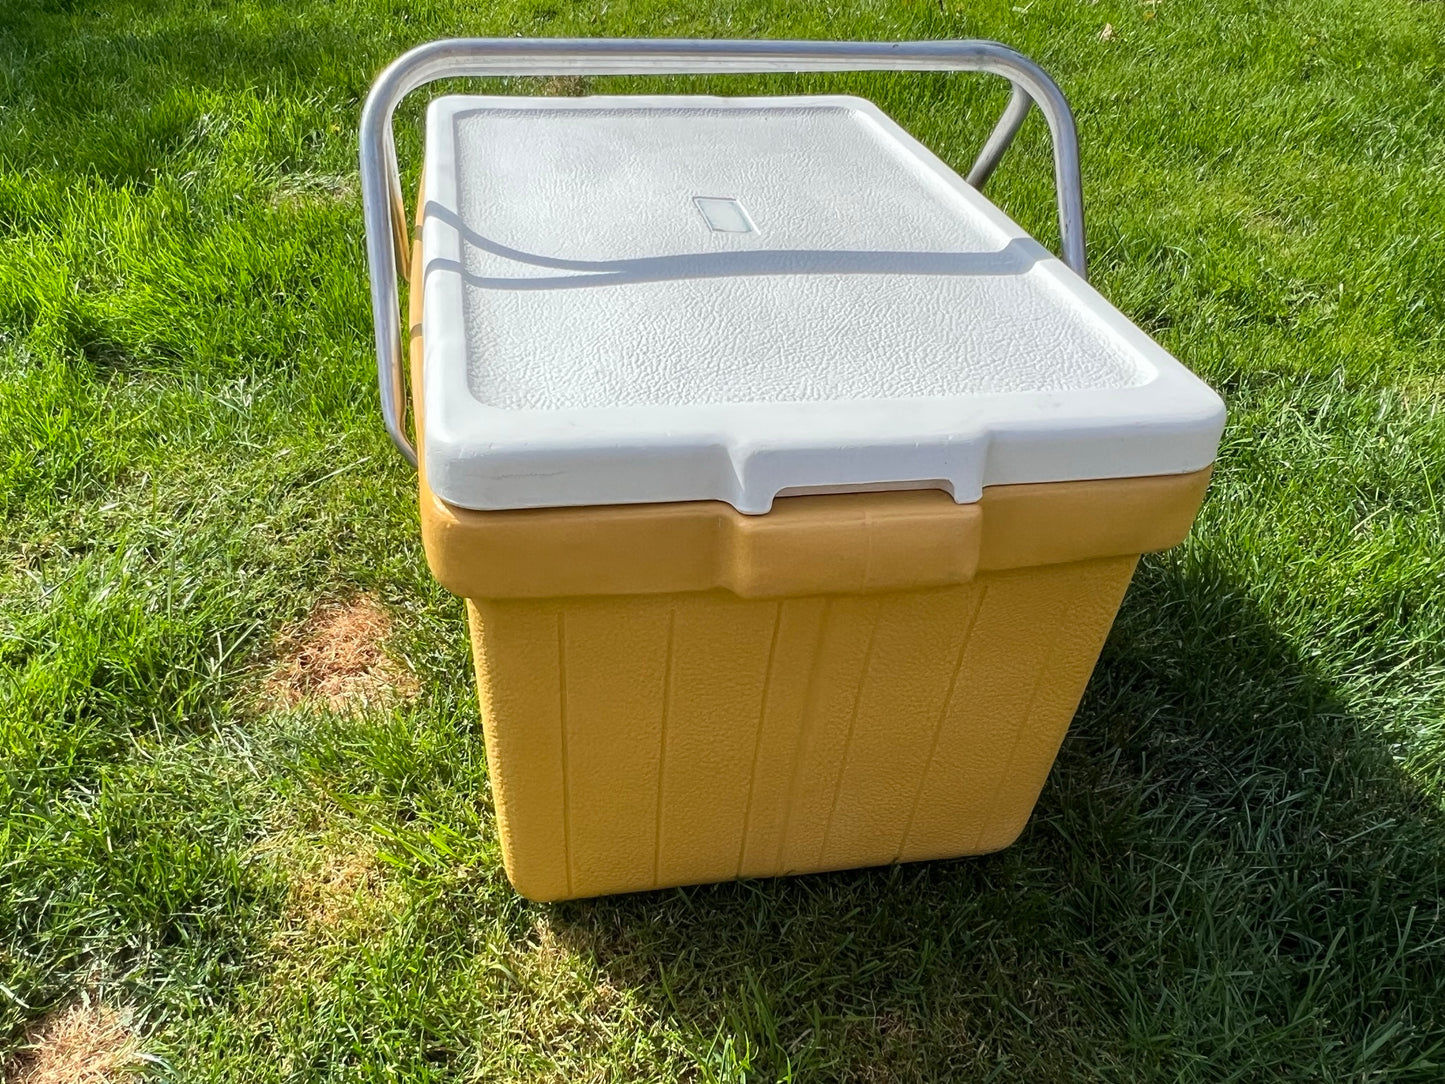 Vintage 1970's Coleman Picnic Park Outdoor Camping Cooler Ice Chest with Aluminium Carrying Handles Lemon Yellow White Excellent With Drain Plug Very RARE